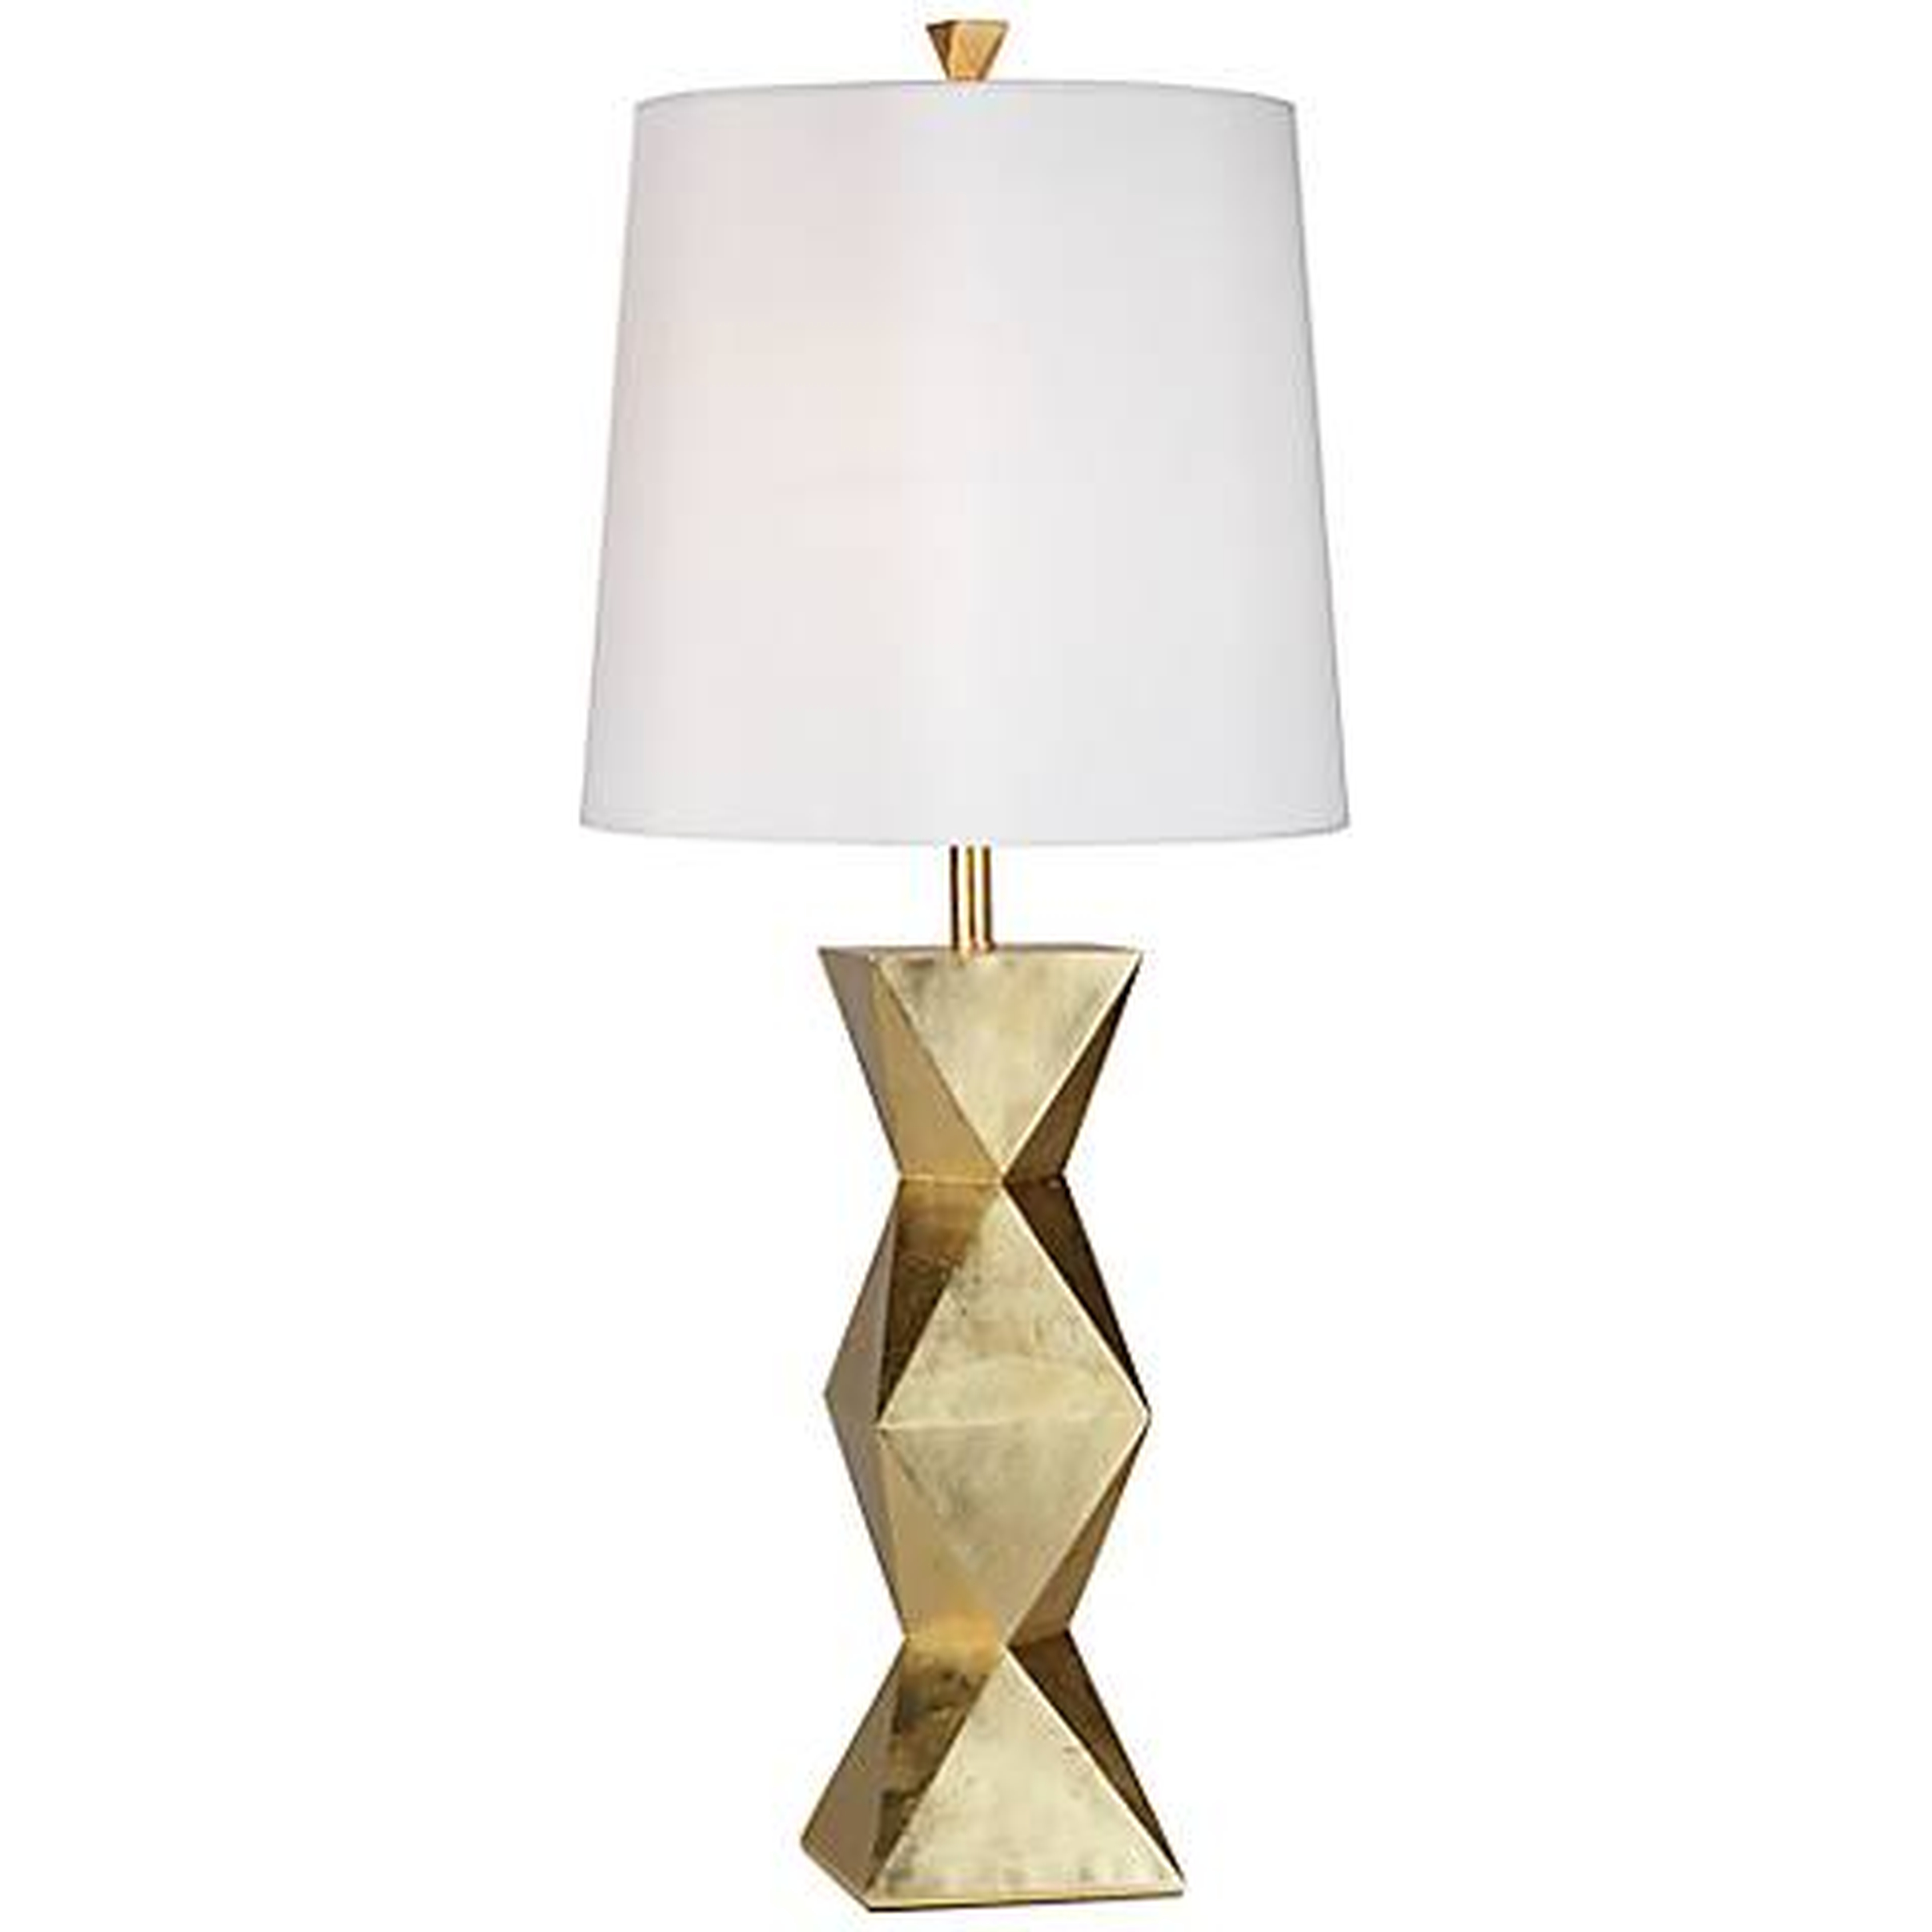 Ripley Gold Table Lamp - Lamps Plus